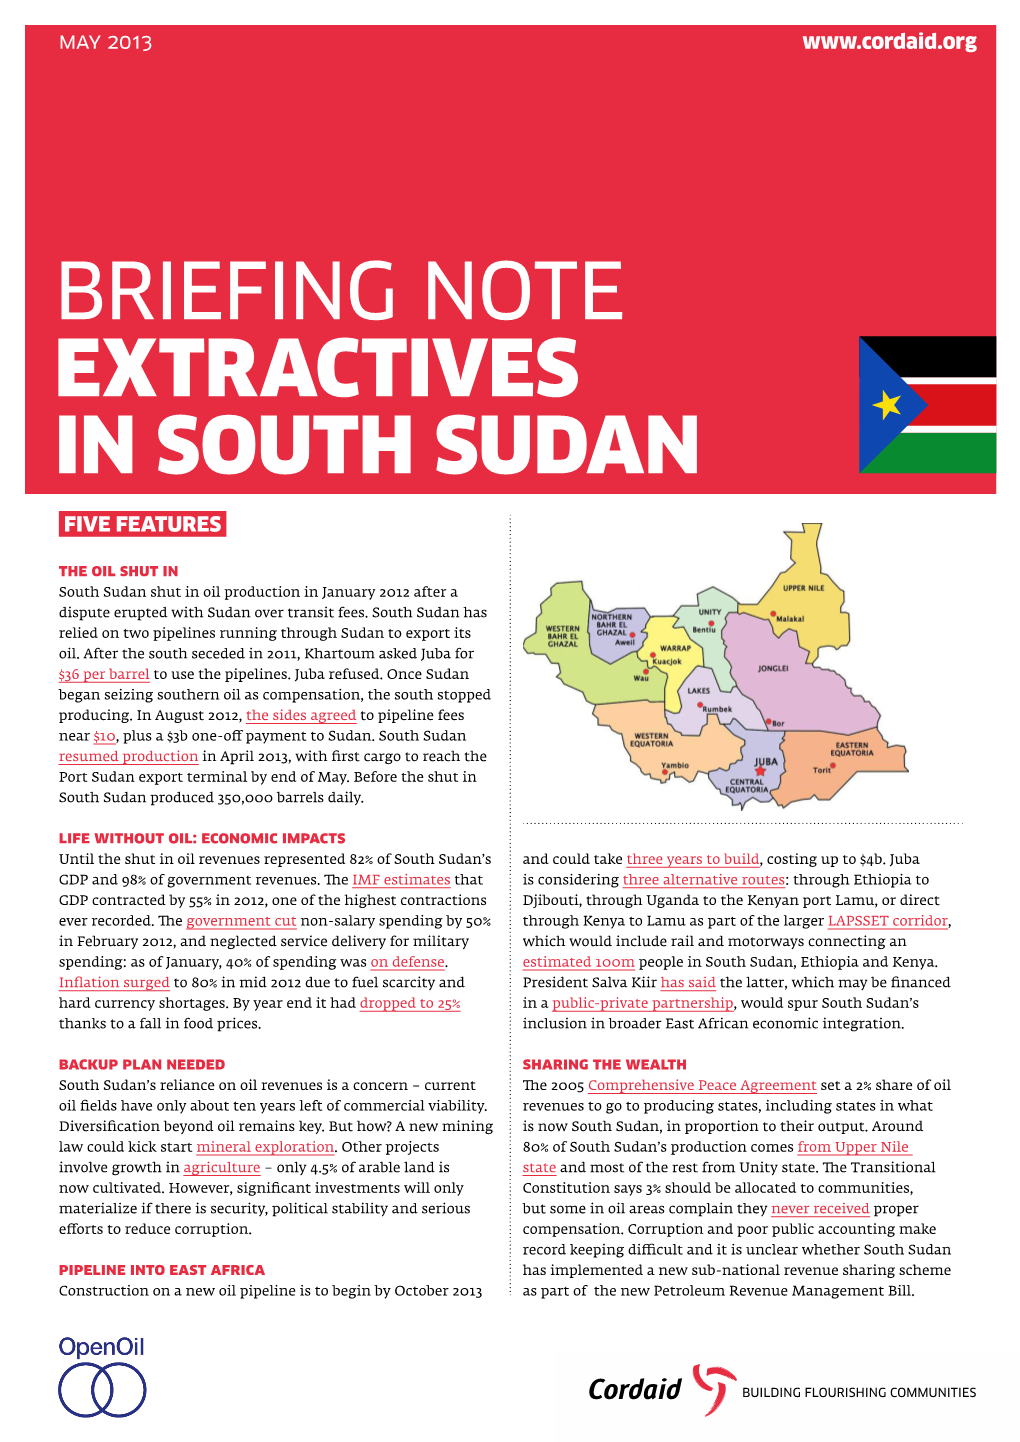 Briefing Note EXTRACTIVES in SOUTH SUDAN